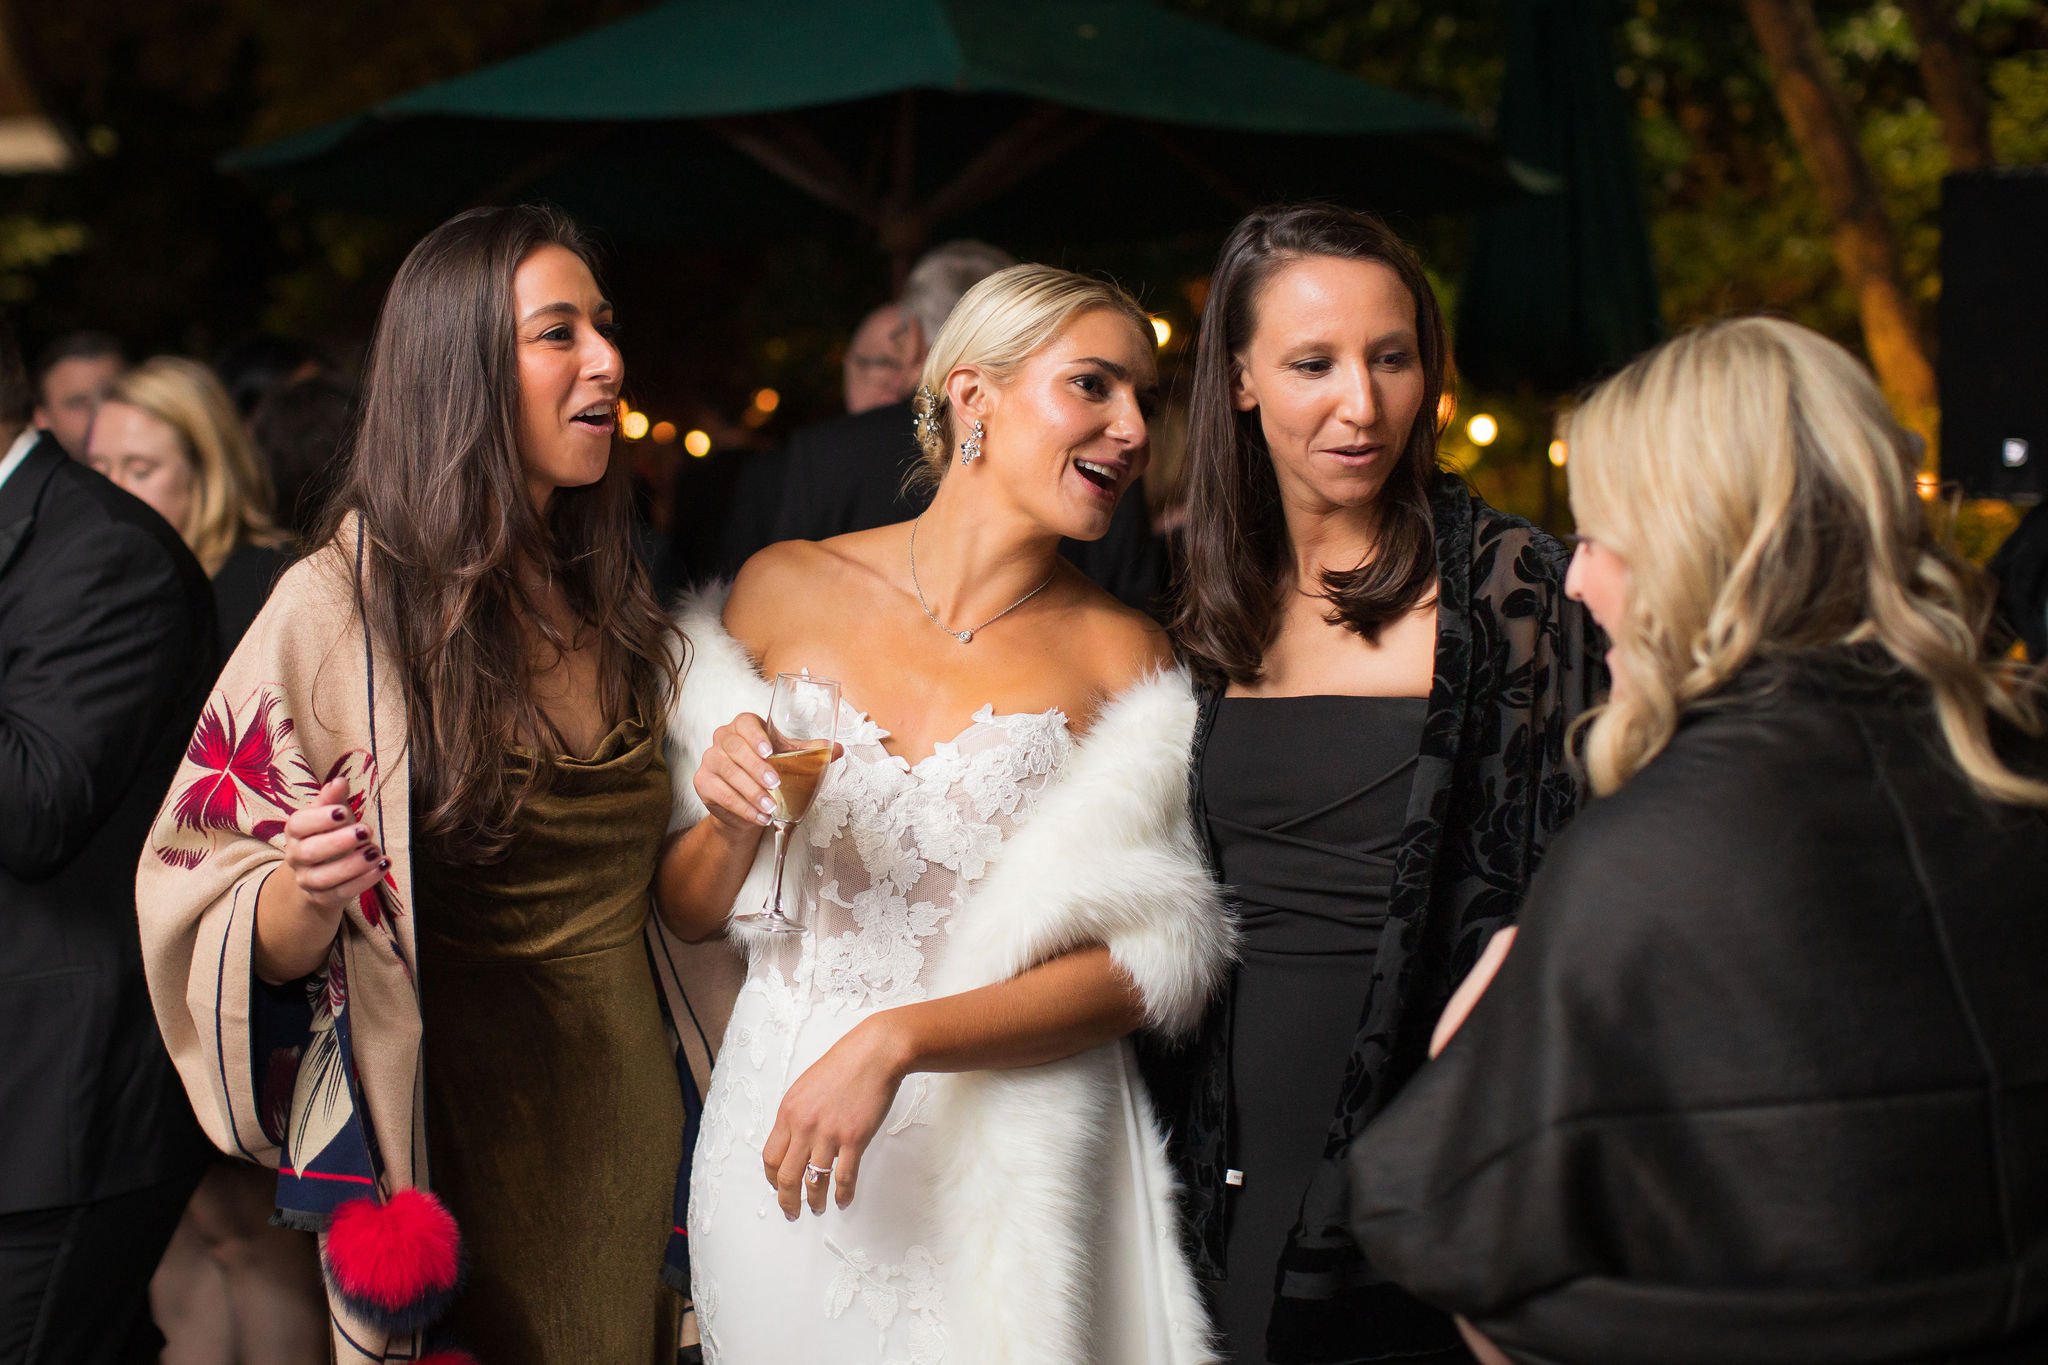  central park boathouse sweetheart gown reception  